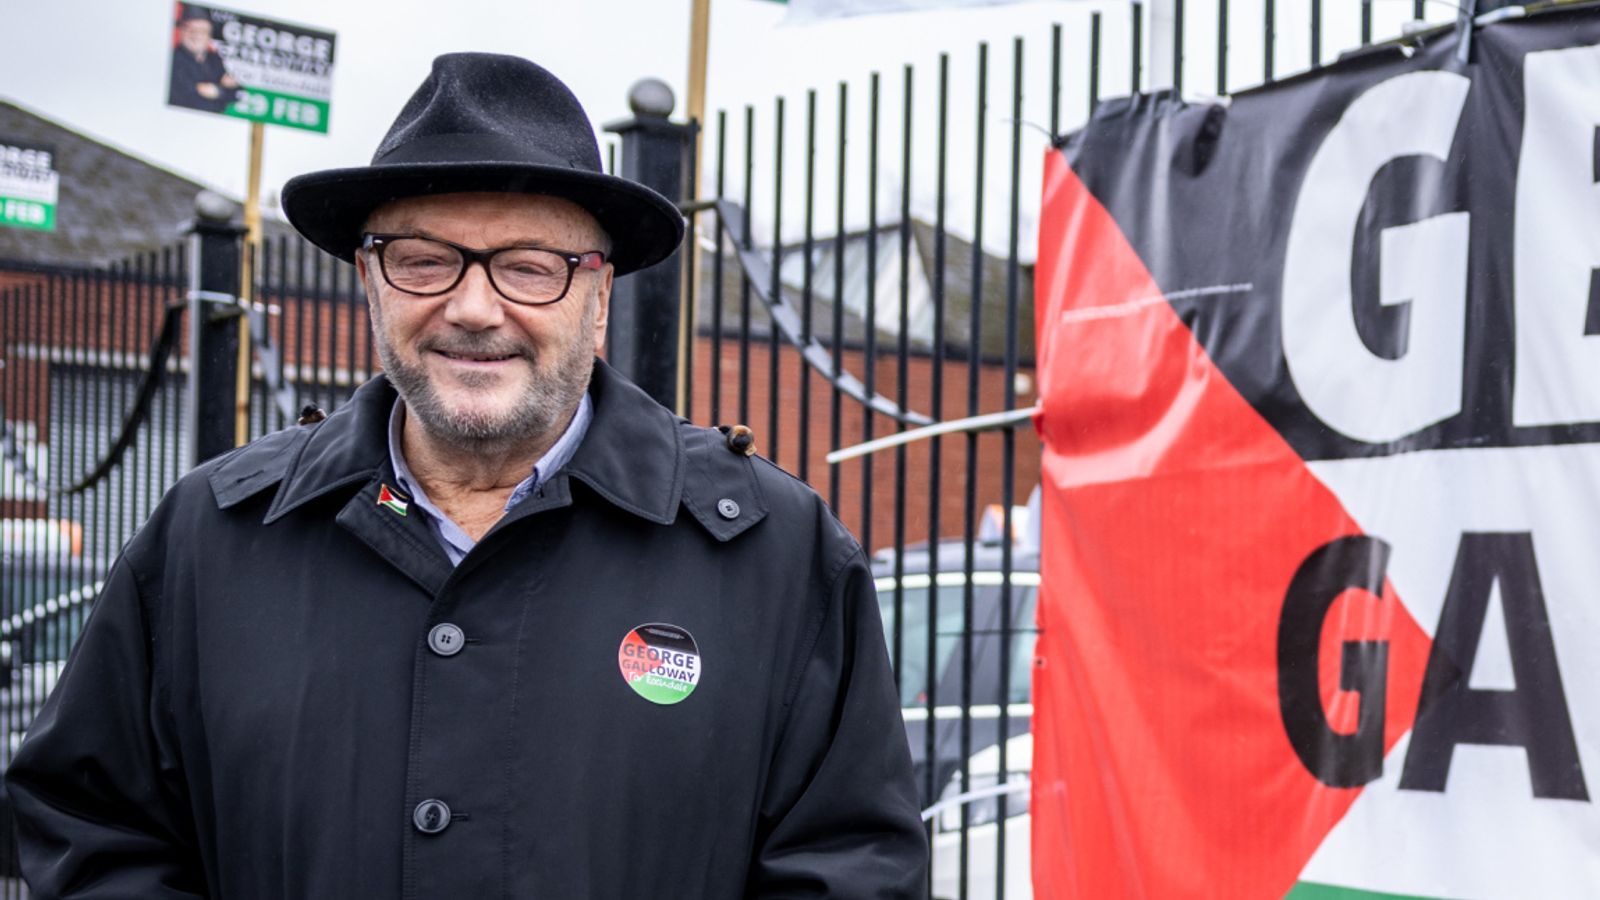 Who is George Galloway, the new MP for Rochdale?